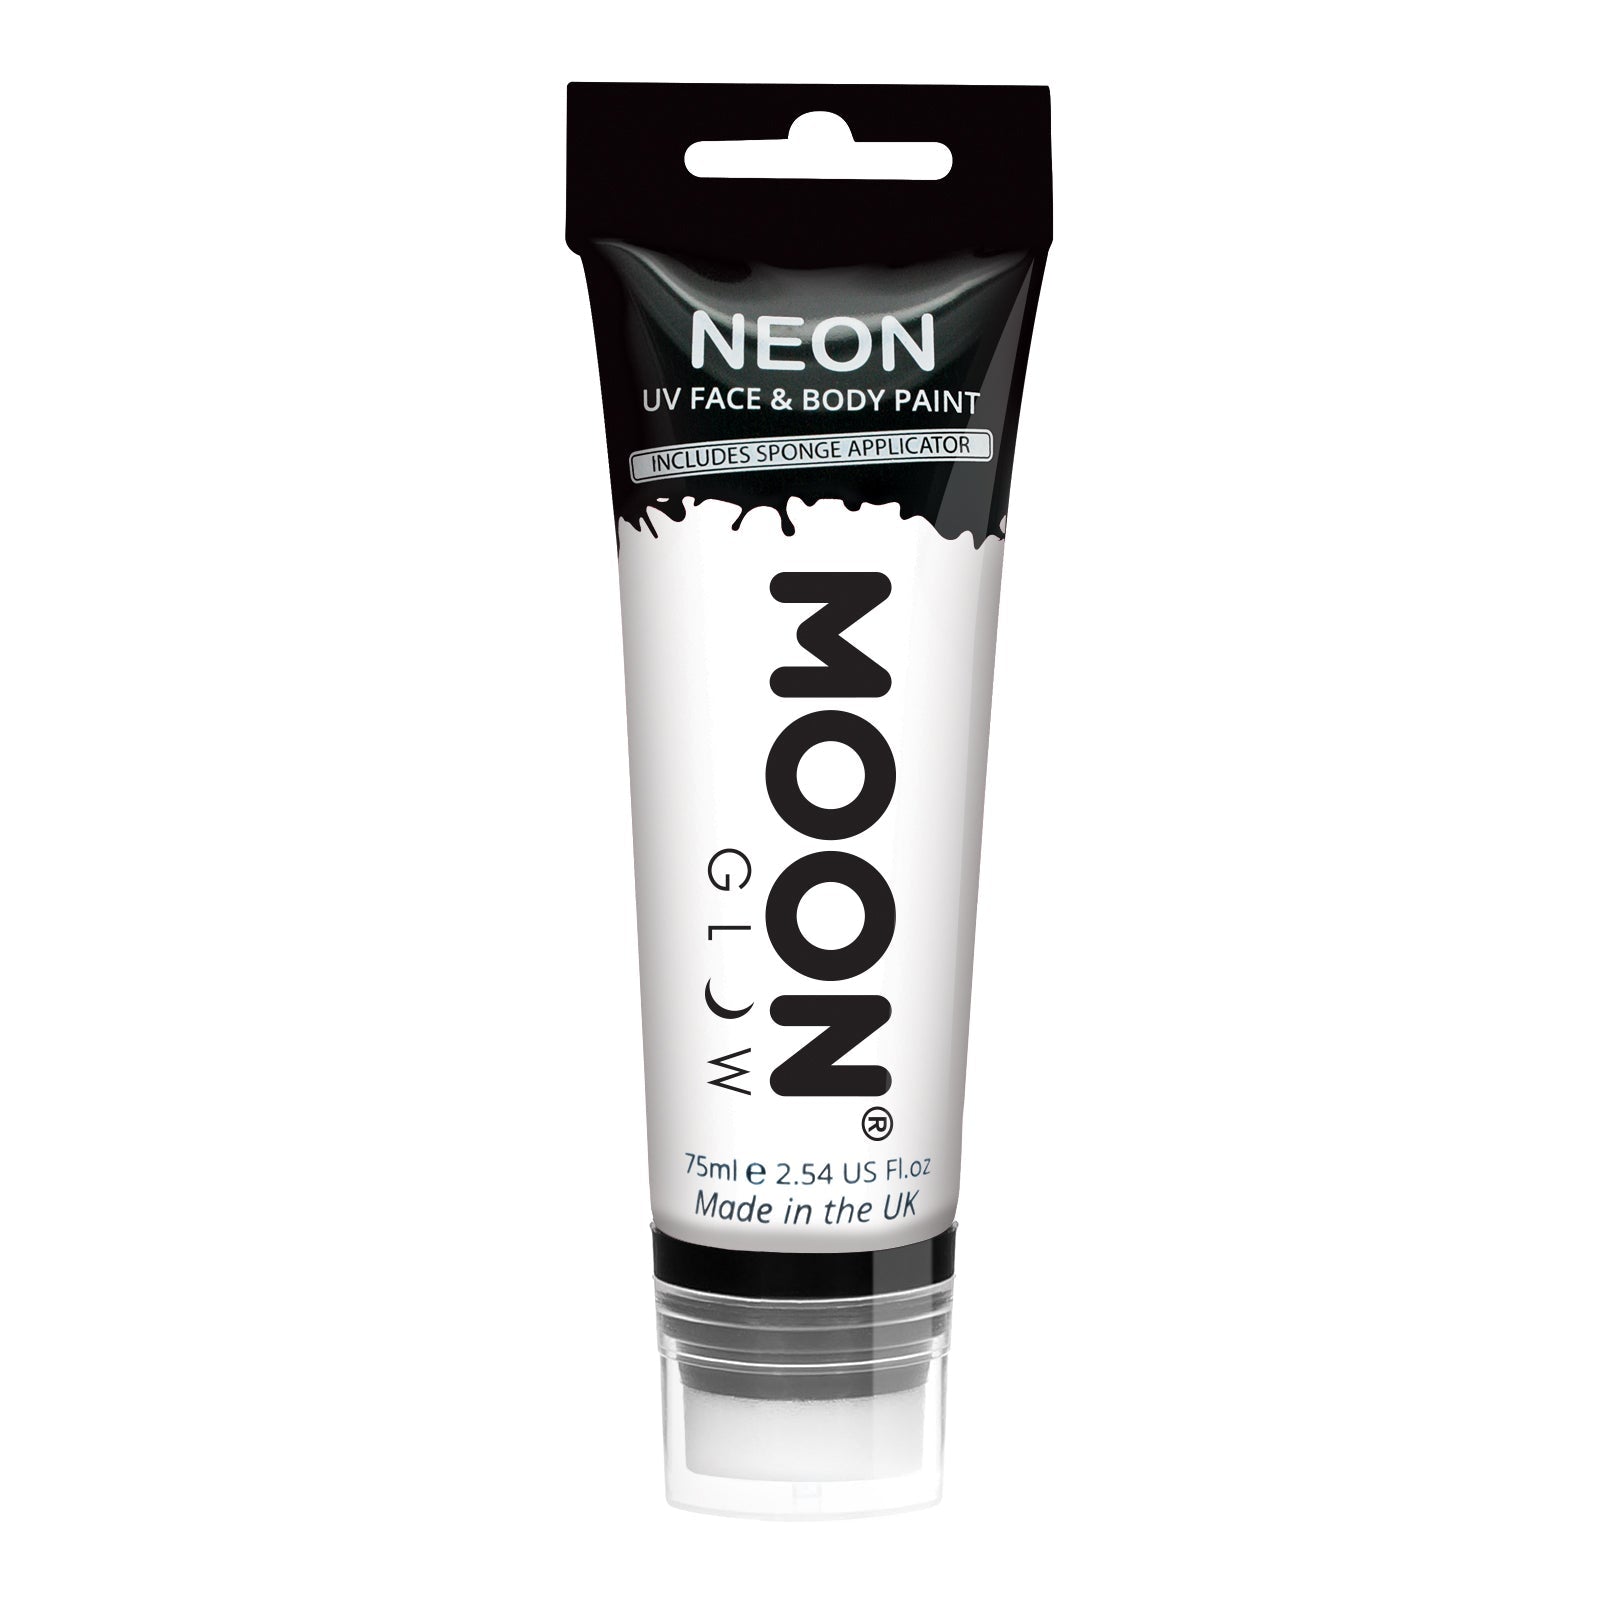 White - Neon UV Glow Blacklight Face Paint w/applicator, 75mL. Cosmetically certified, FDA & Health Canada compliant, cruelty free and vegan.